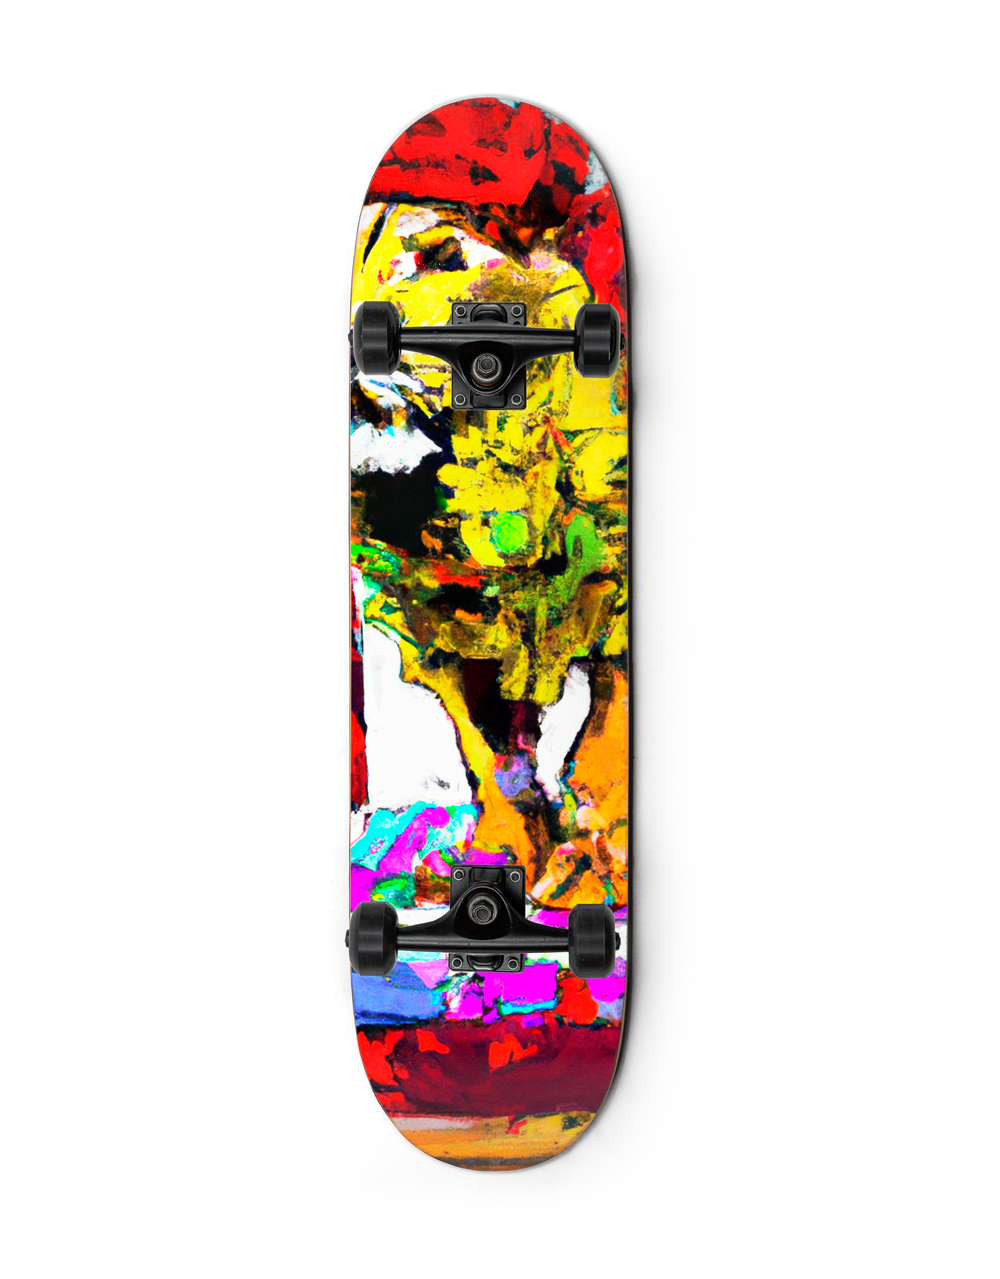 A collector skateboard painted with vibrant color patches and brush strokes